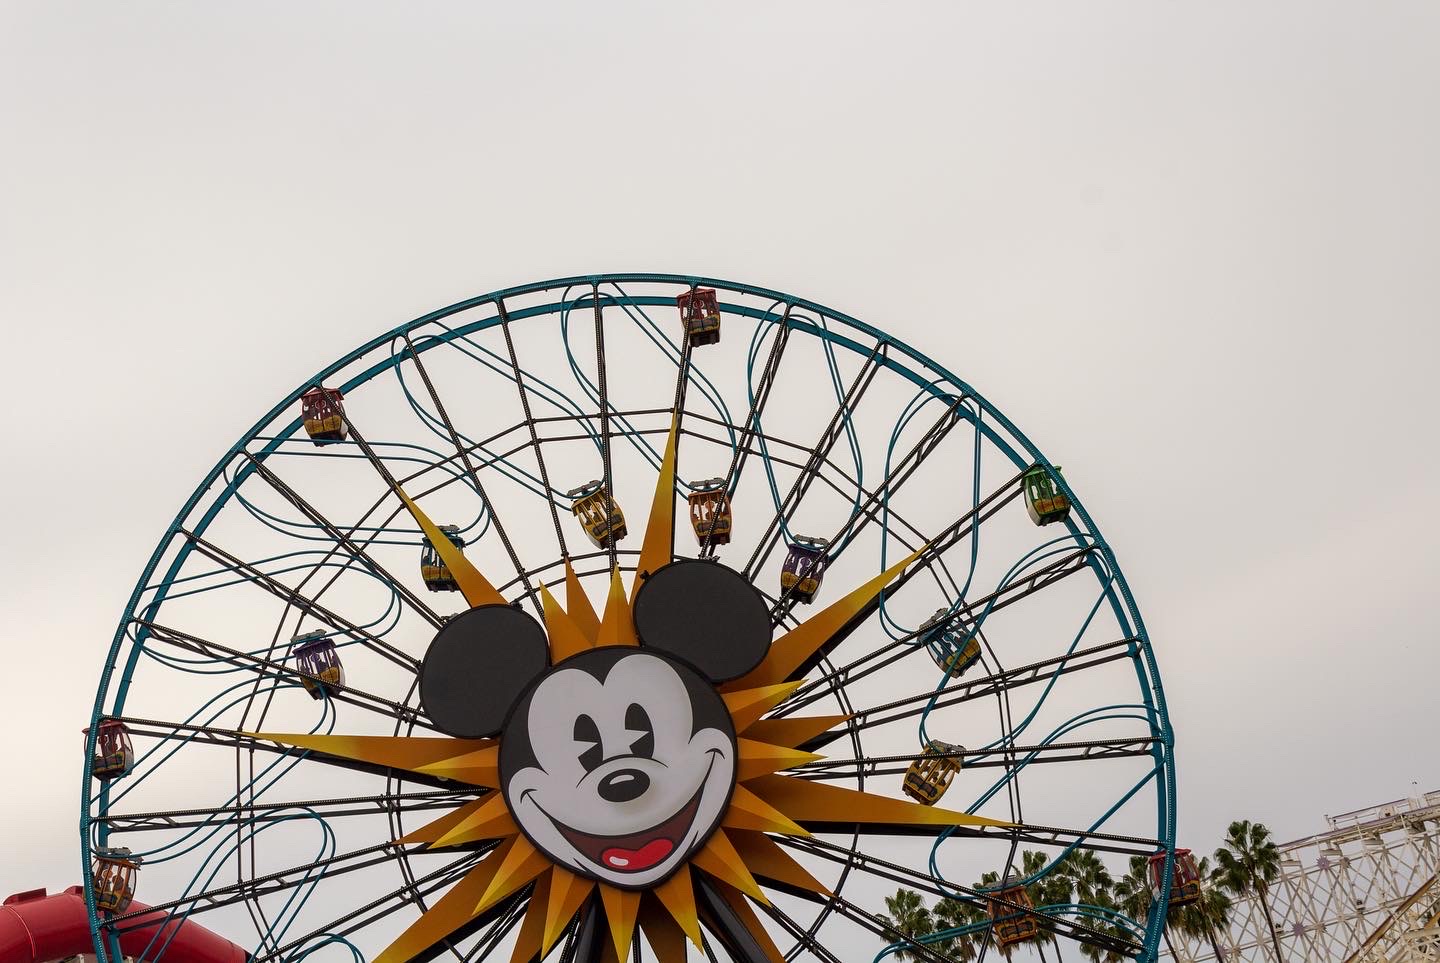 Section of large Ferris wheel with the face of Mickey Mouse at its center against a smooth grey sky